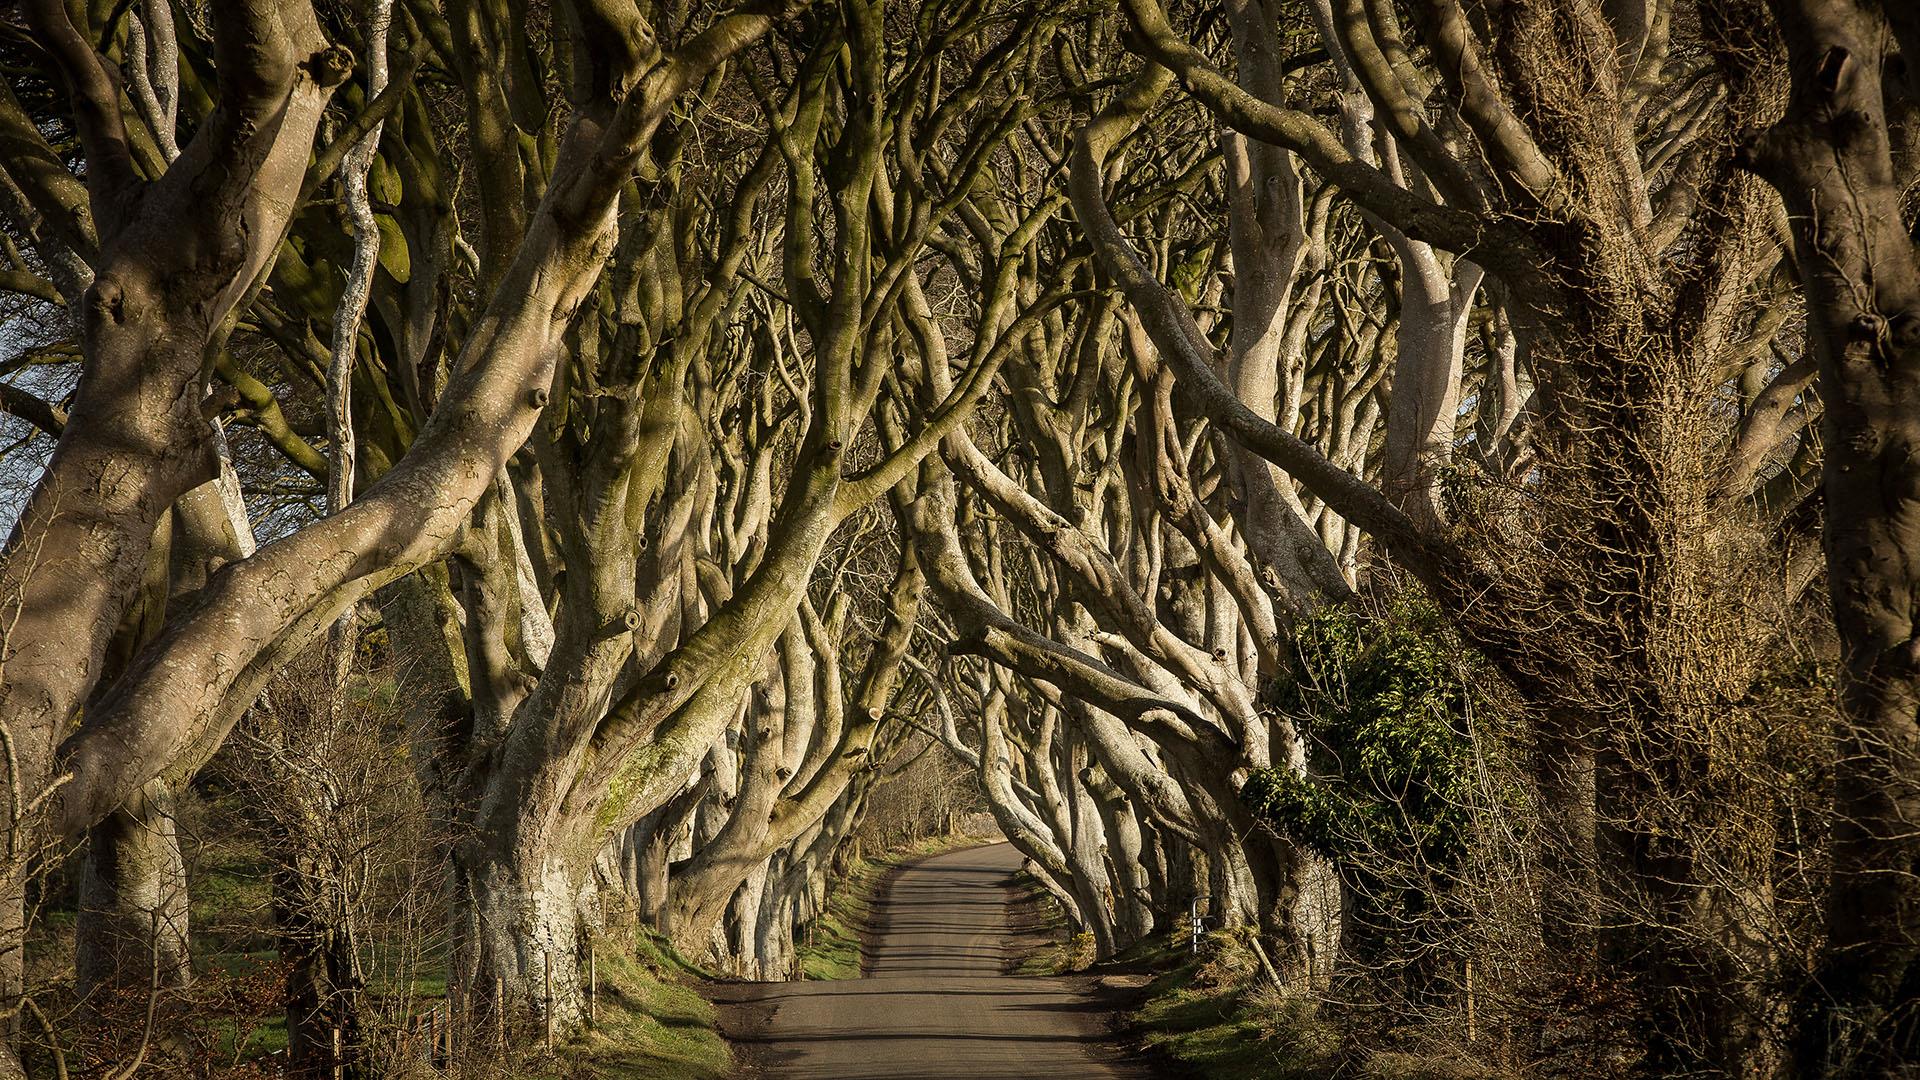 Visit Game of Thrones - Filming Locations - Discover Northern Ireland